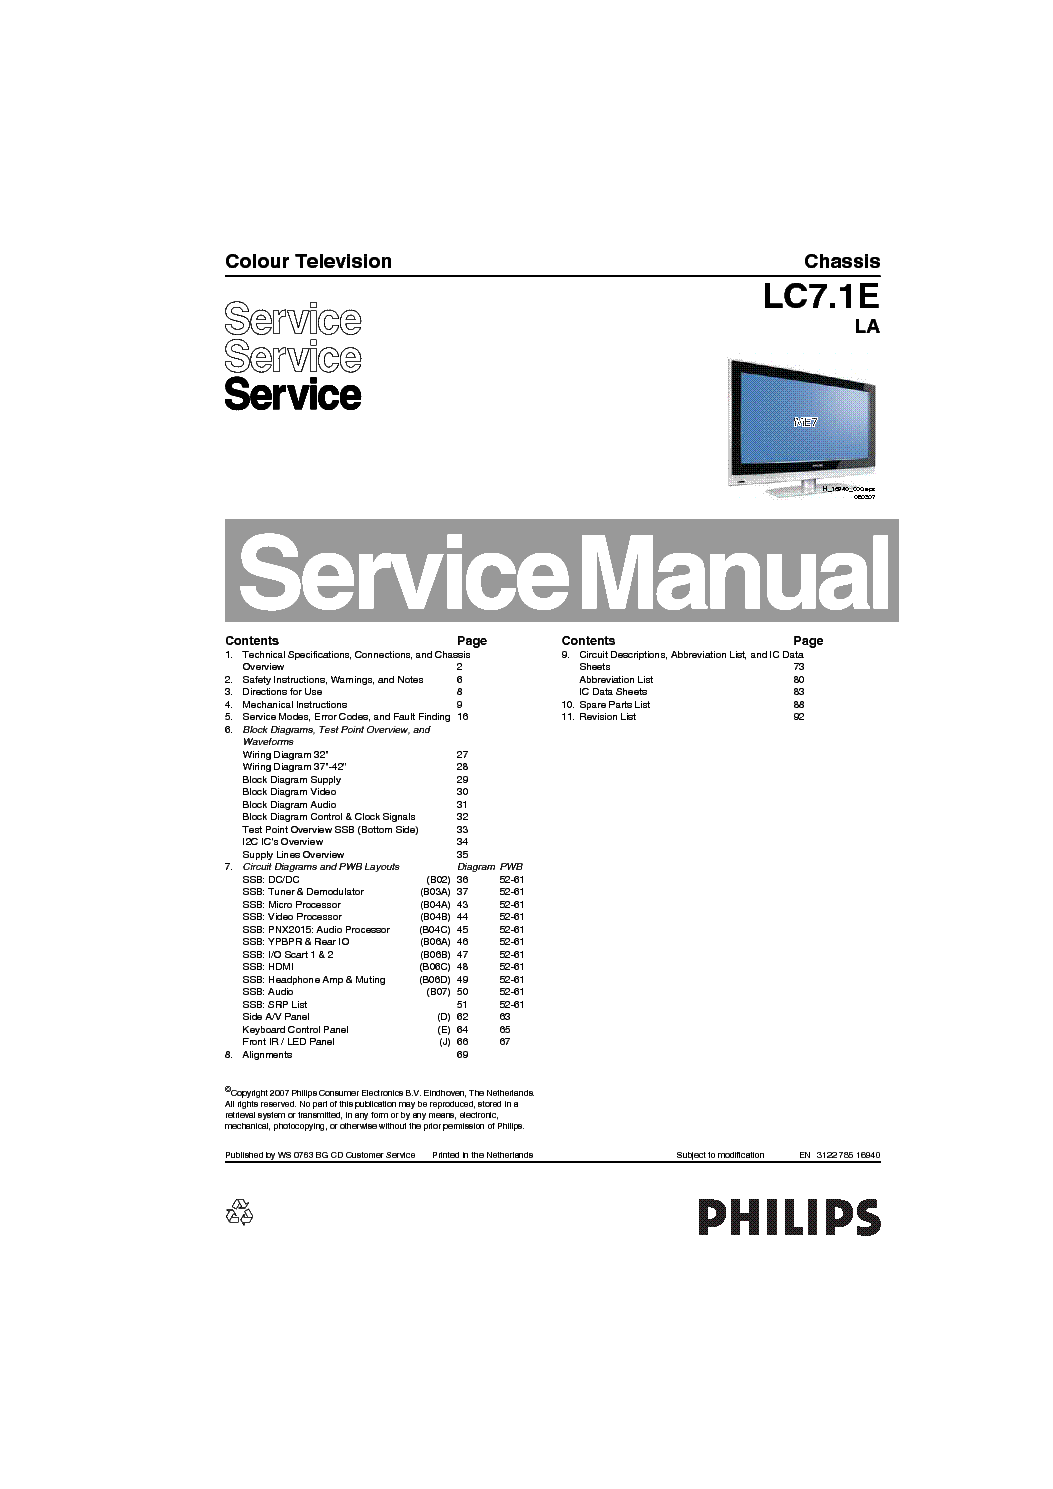 PHILIPS TV LC7.1ELA service manual (1st page)